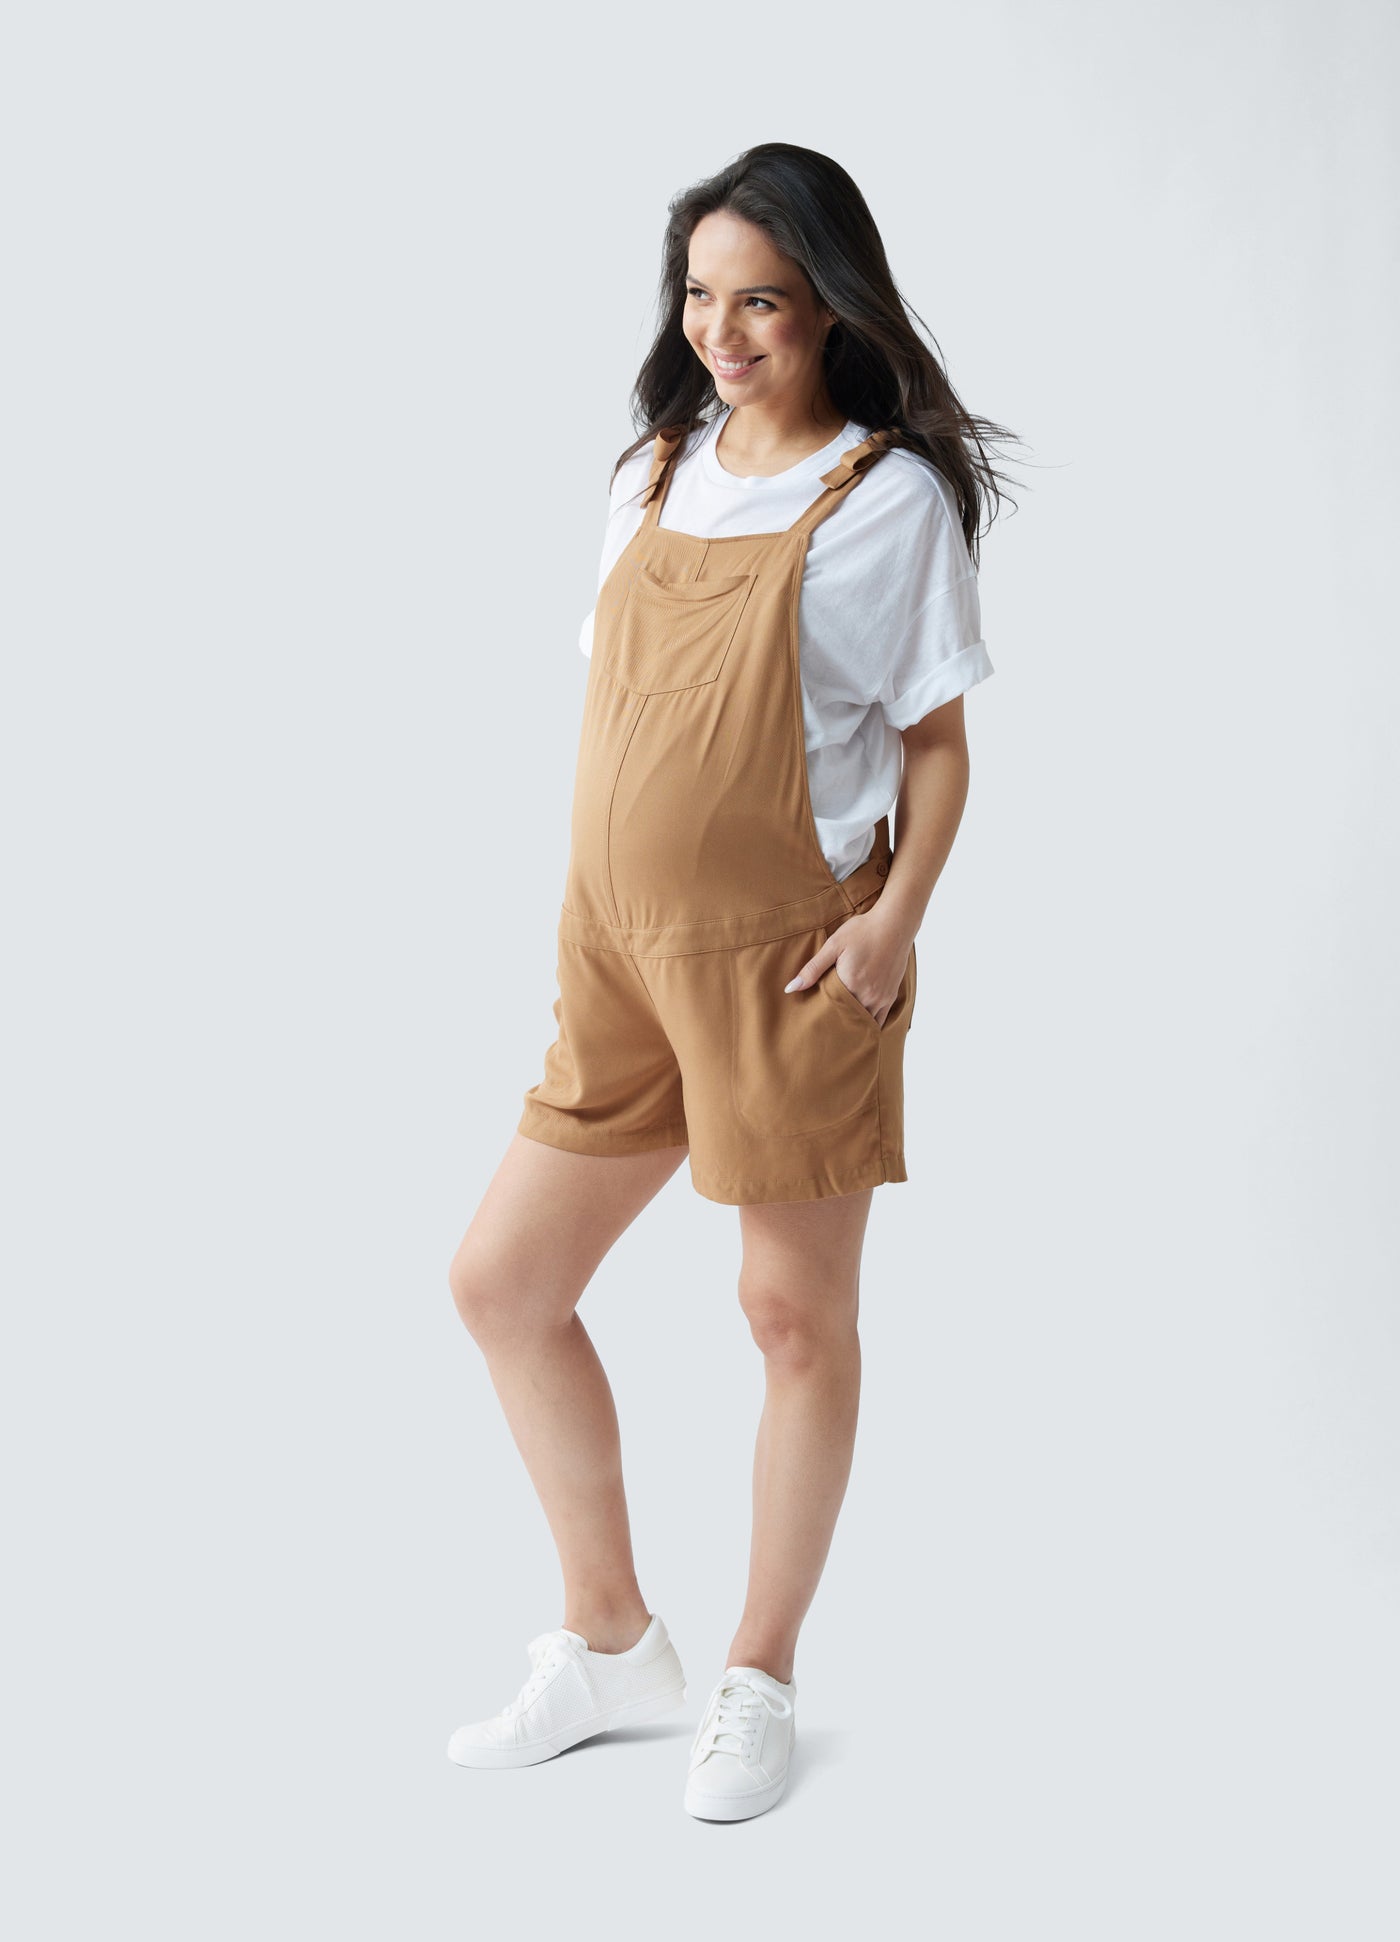 Bianca is 5’9”, 33 weeks pregnant, and wearing size M||Cappucino